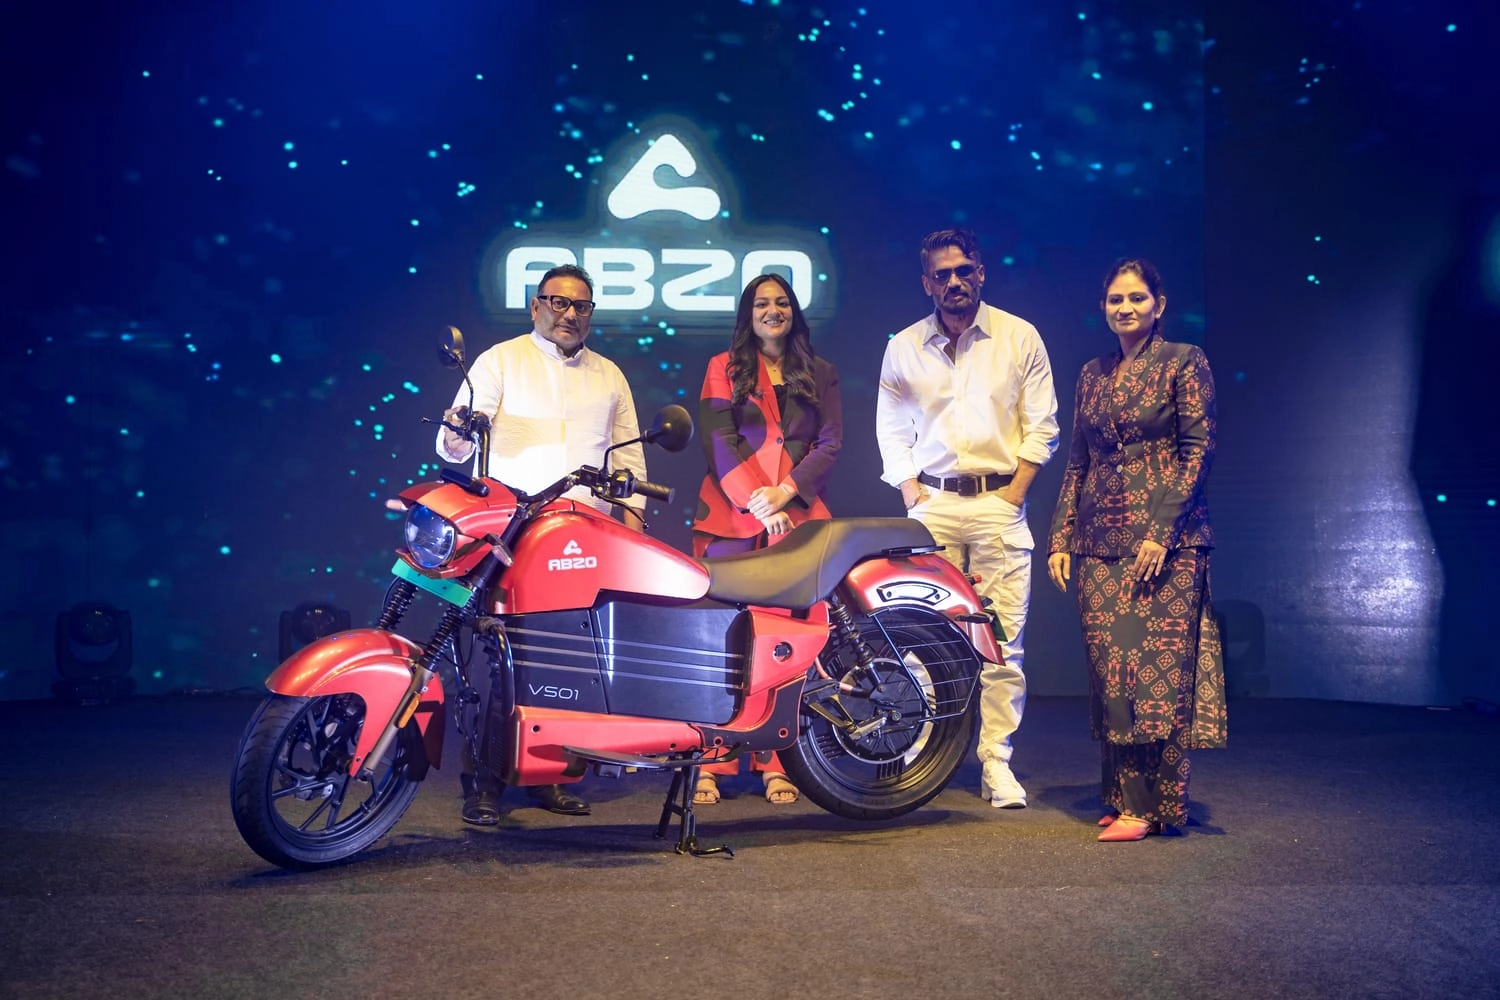 ABZO Motors launched an electric motorcycle named ABZO VS01 in Gujarat